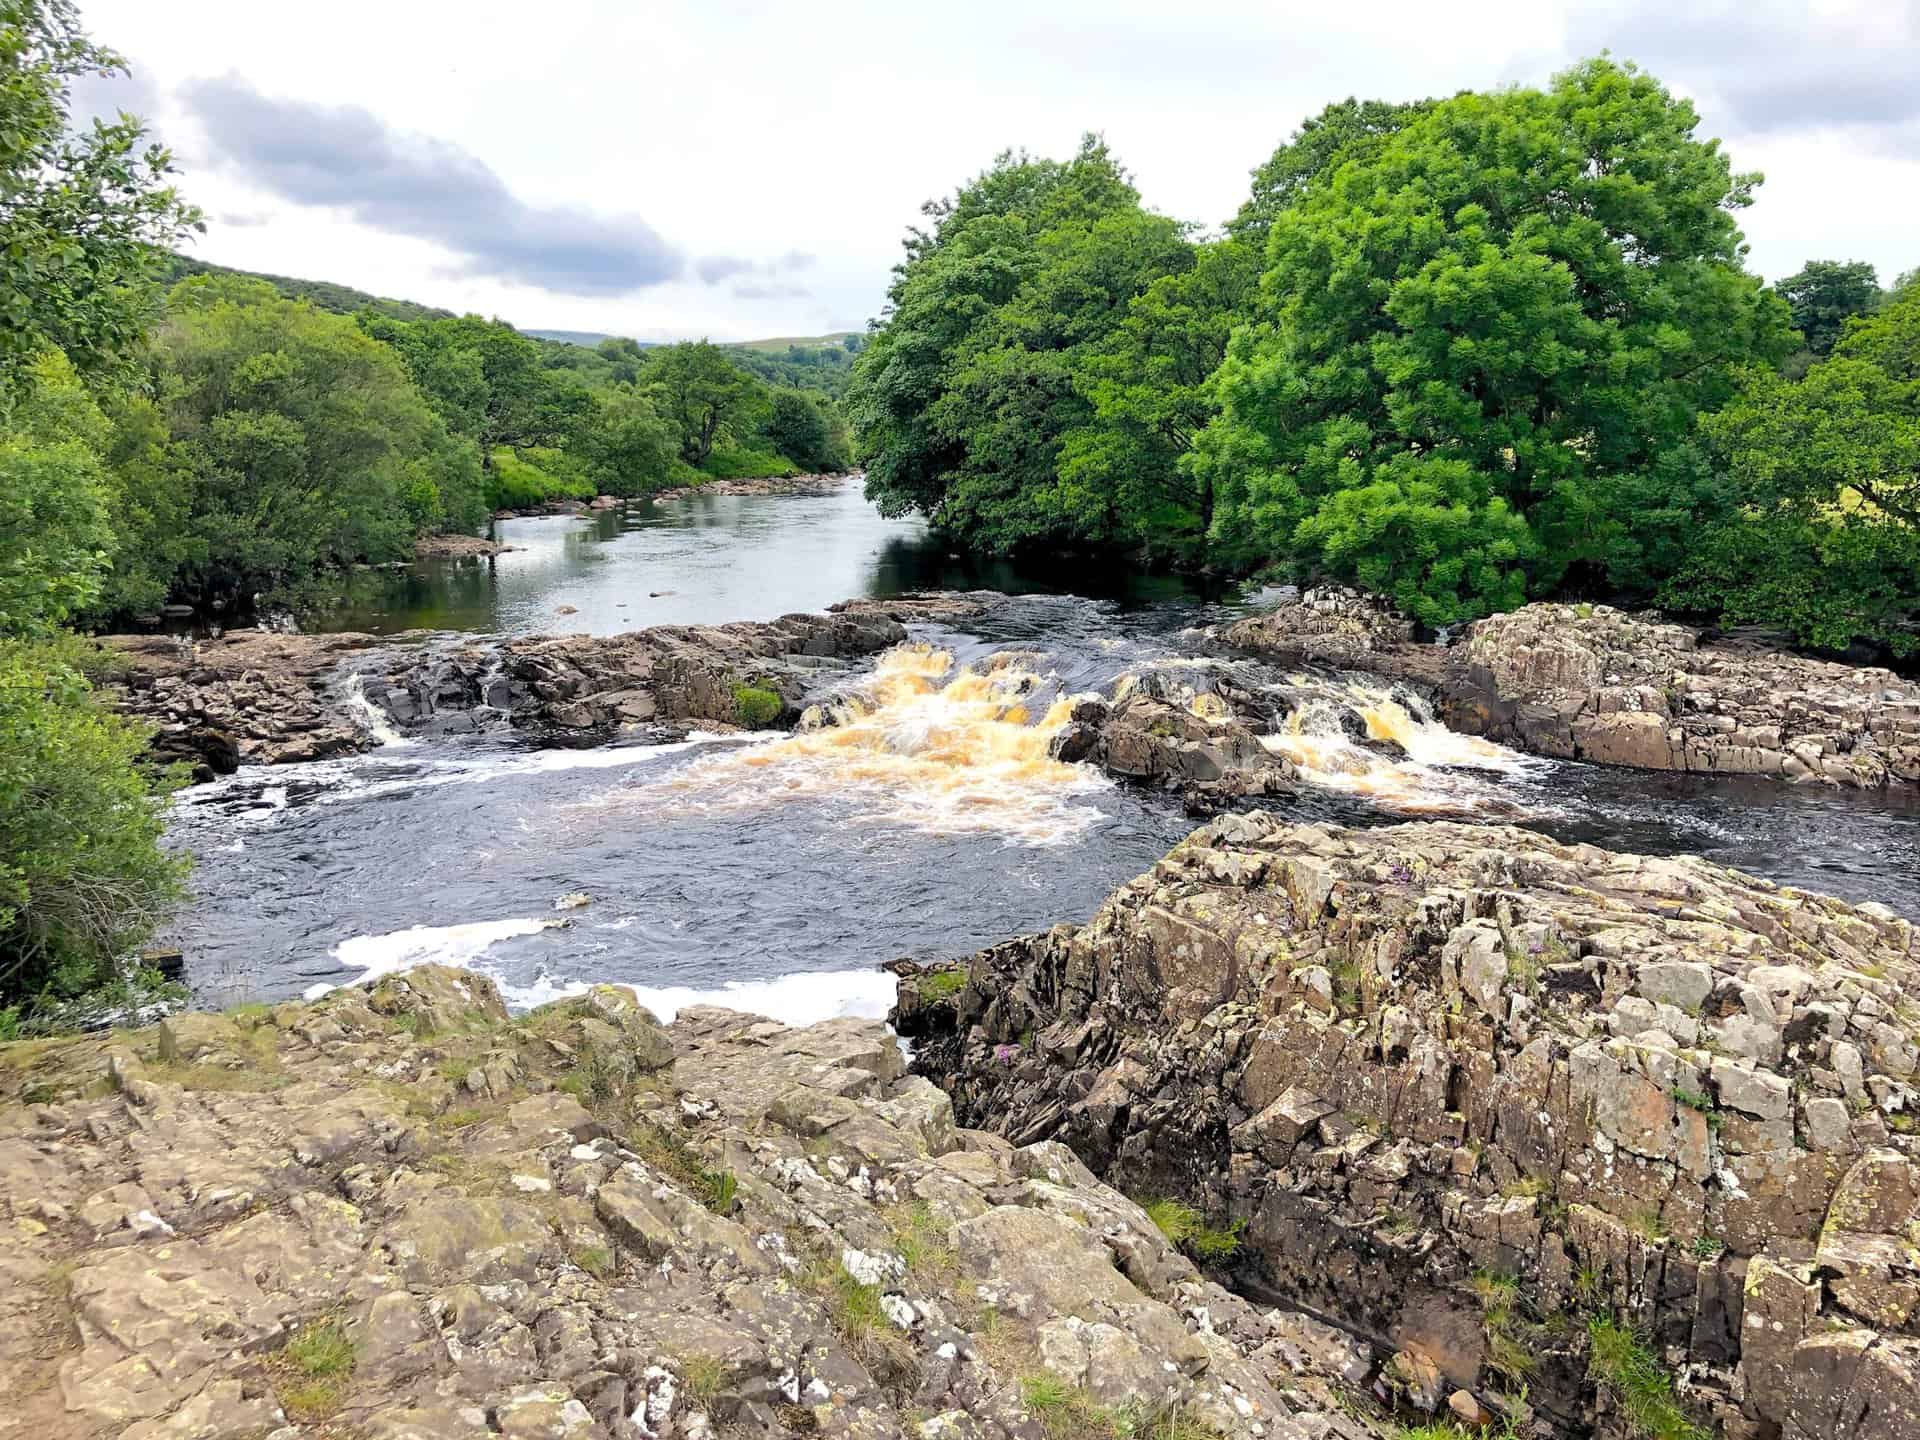 Low Force presents a series of picturesque waterfalls on the River Tees, located approximately 3½ miles north-west of Middleton-in-Teesdale.